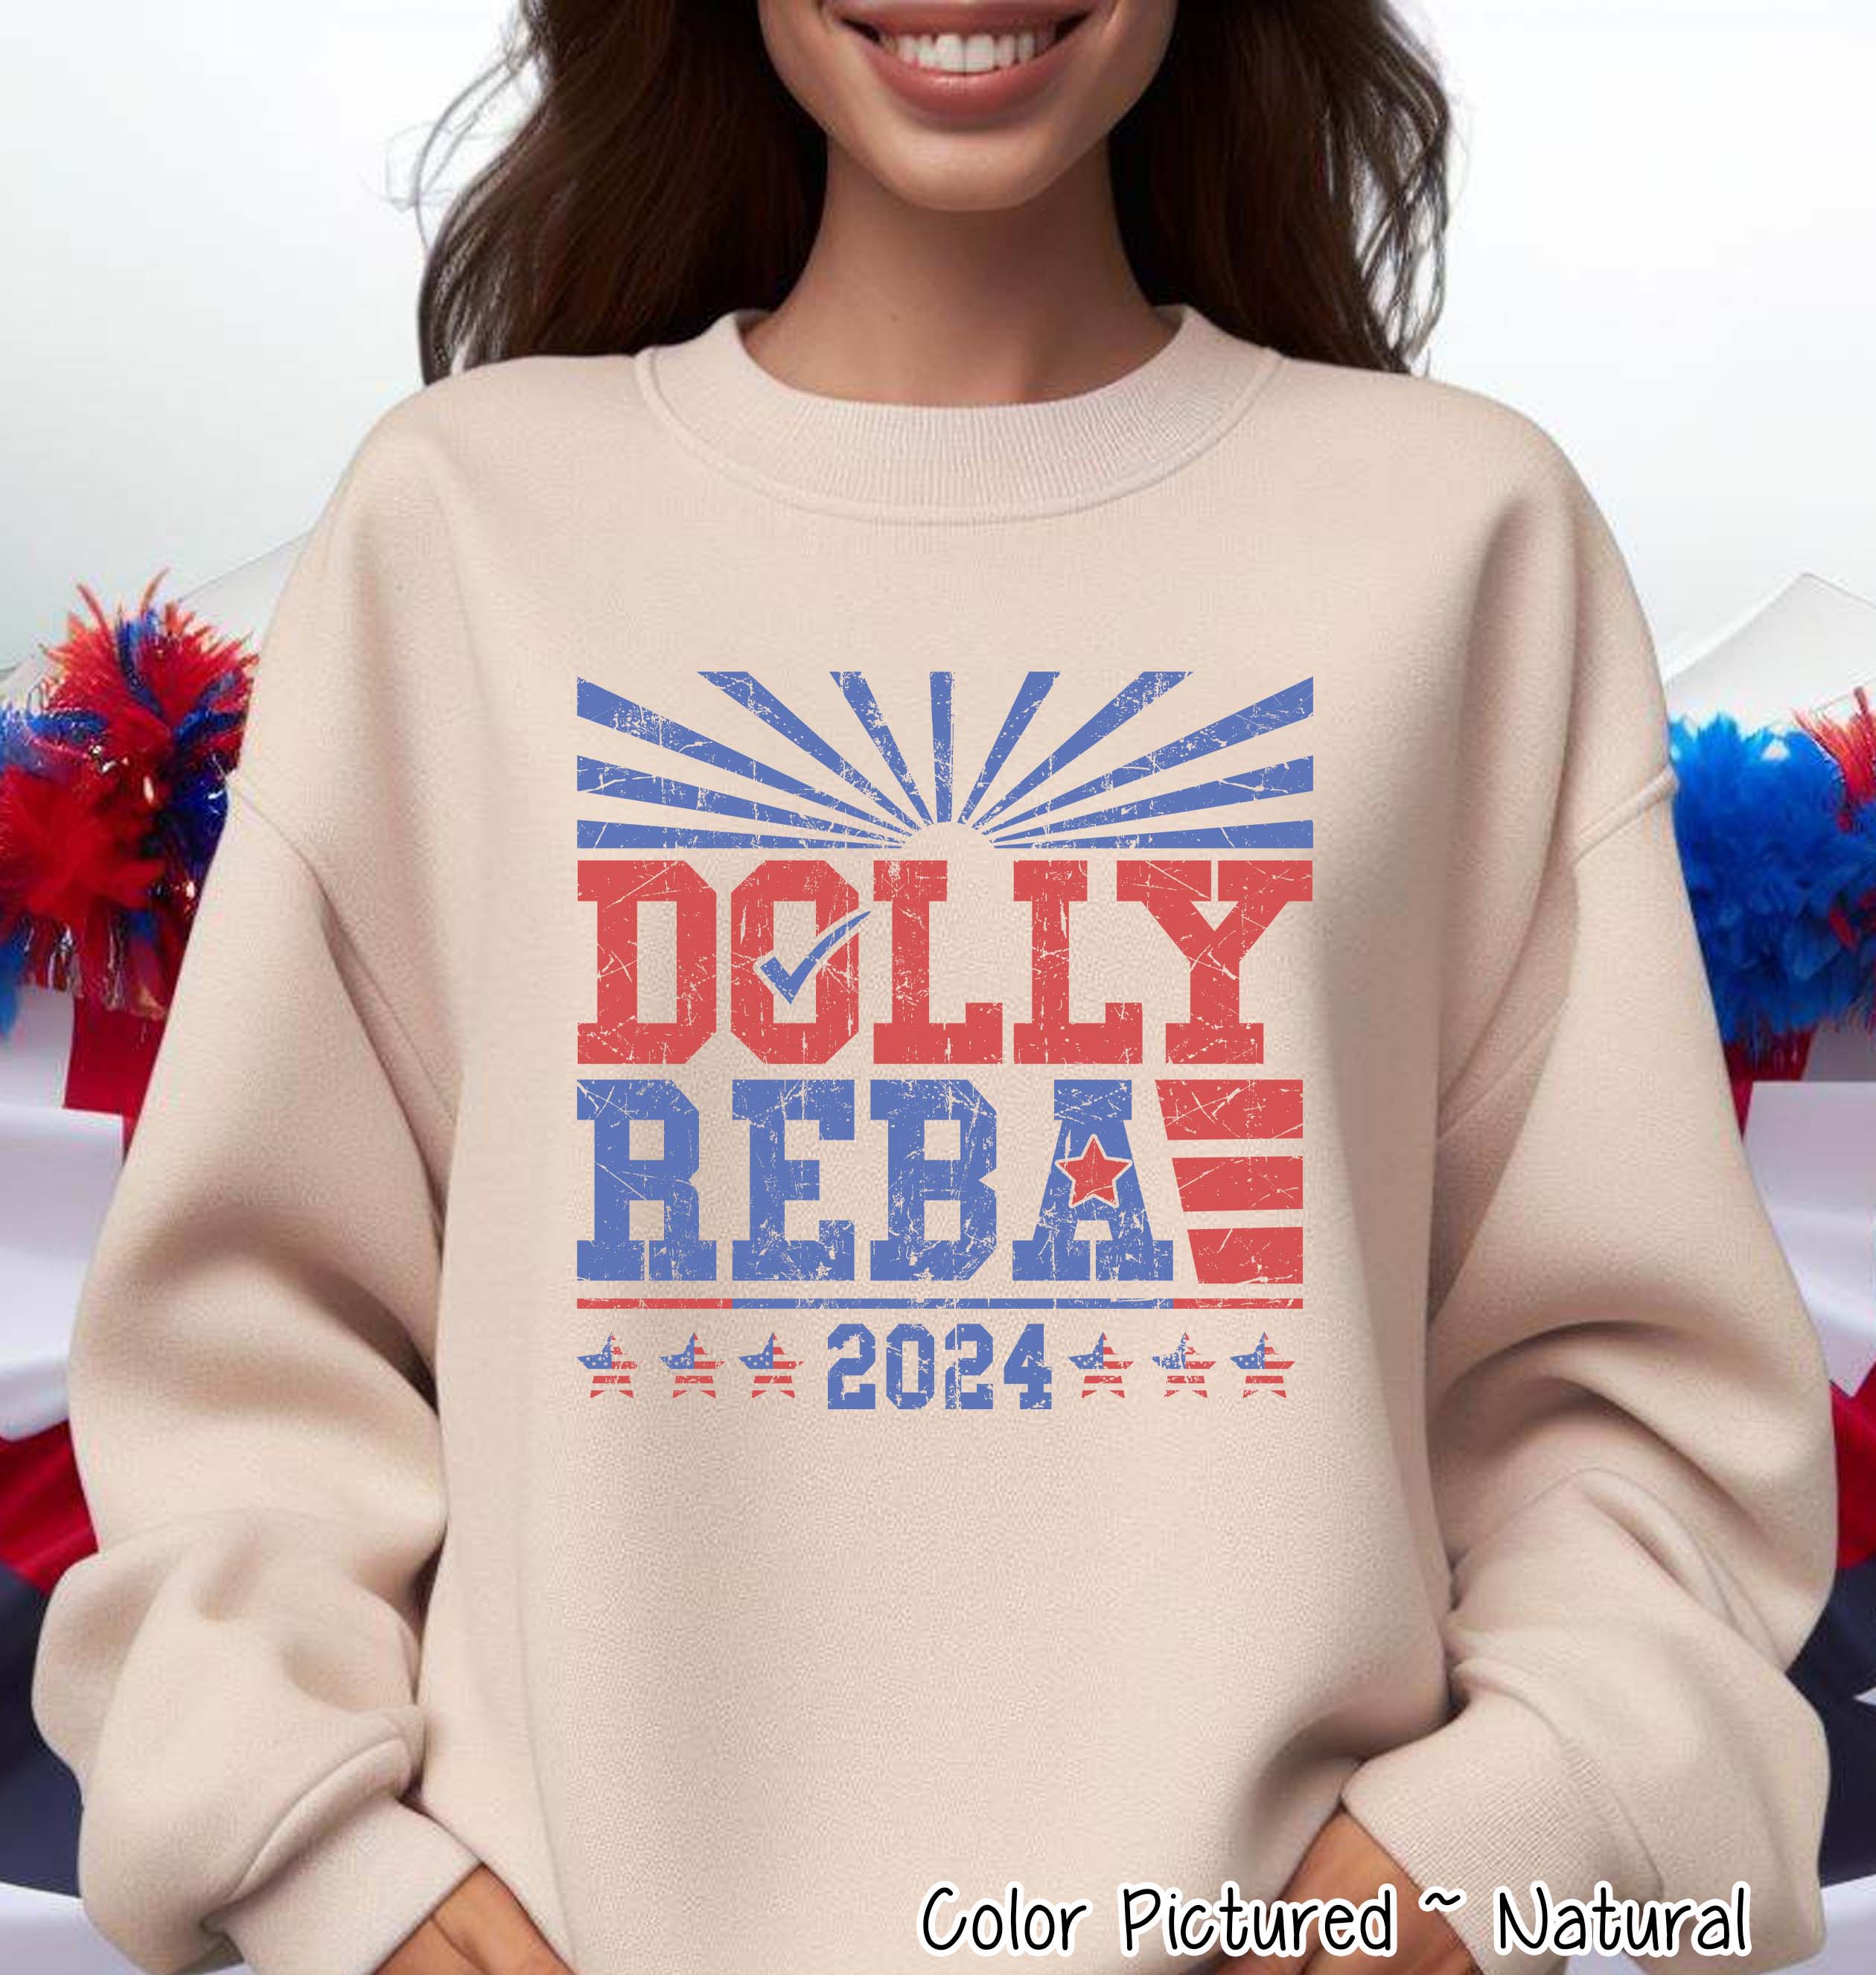 Dolly & Reba for President Funny Political Tee and Sweatshirt